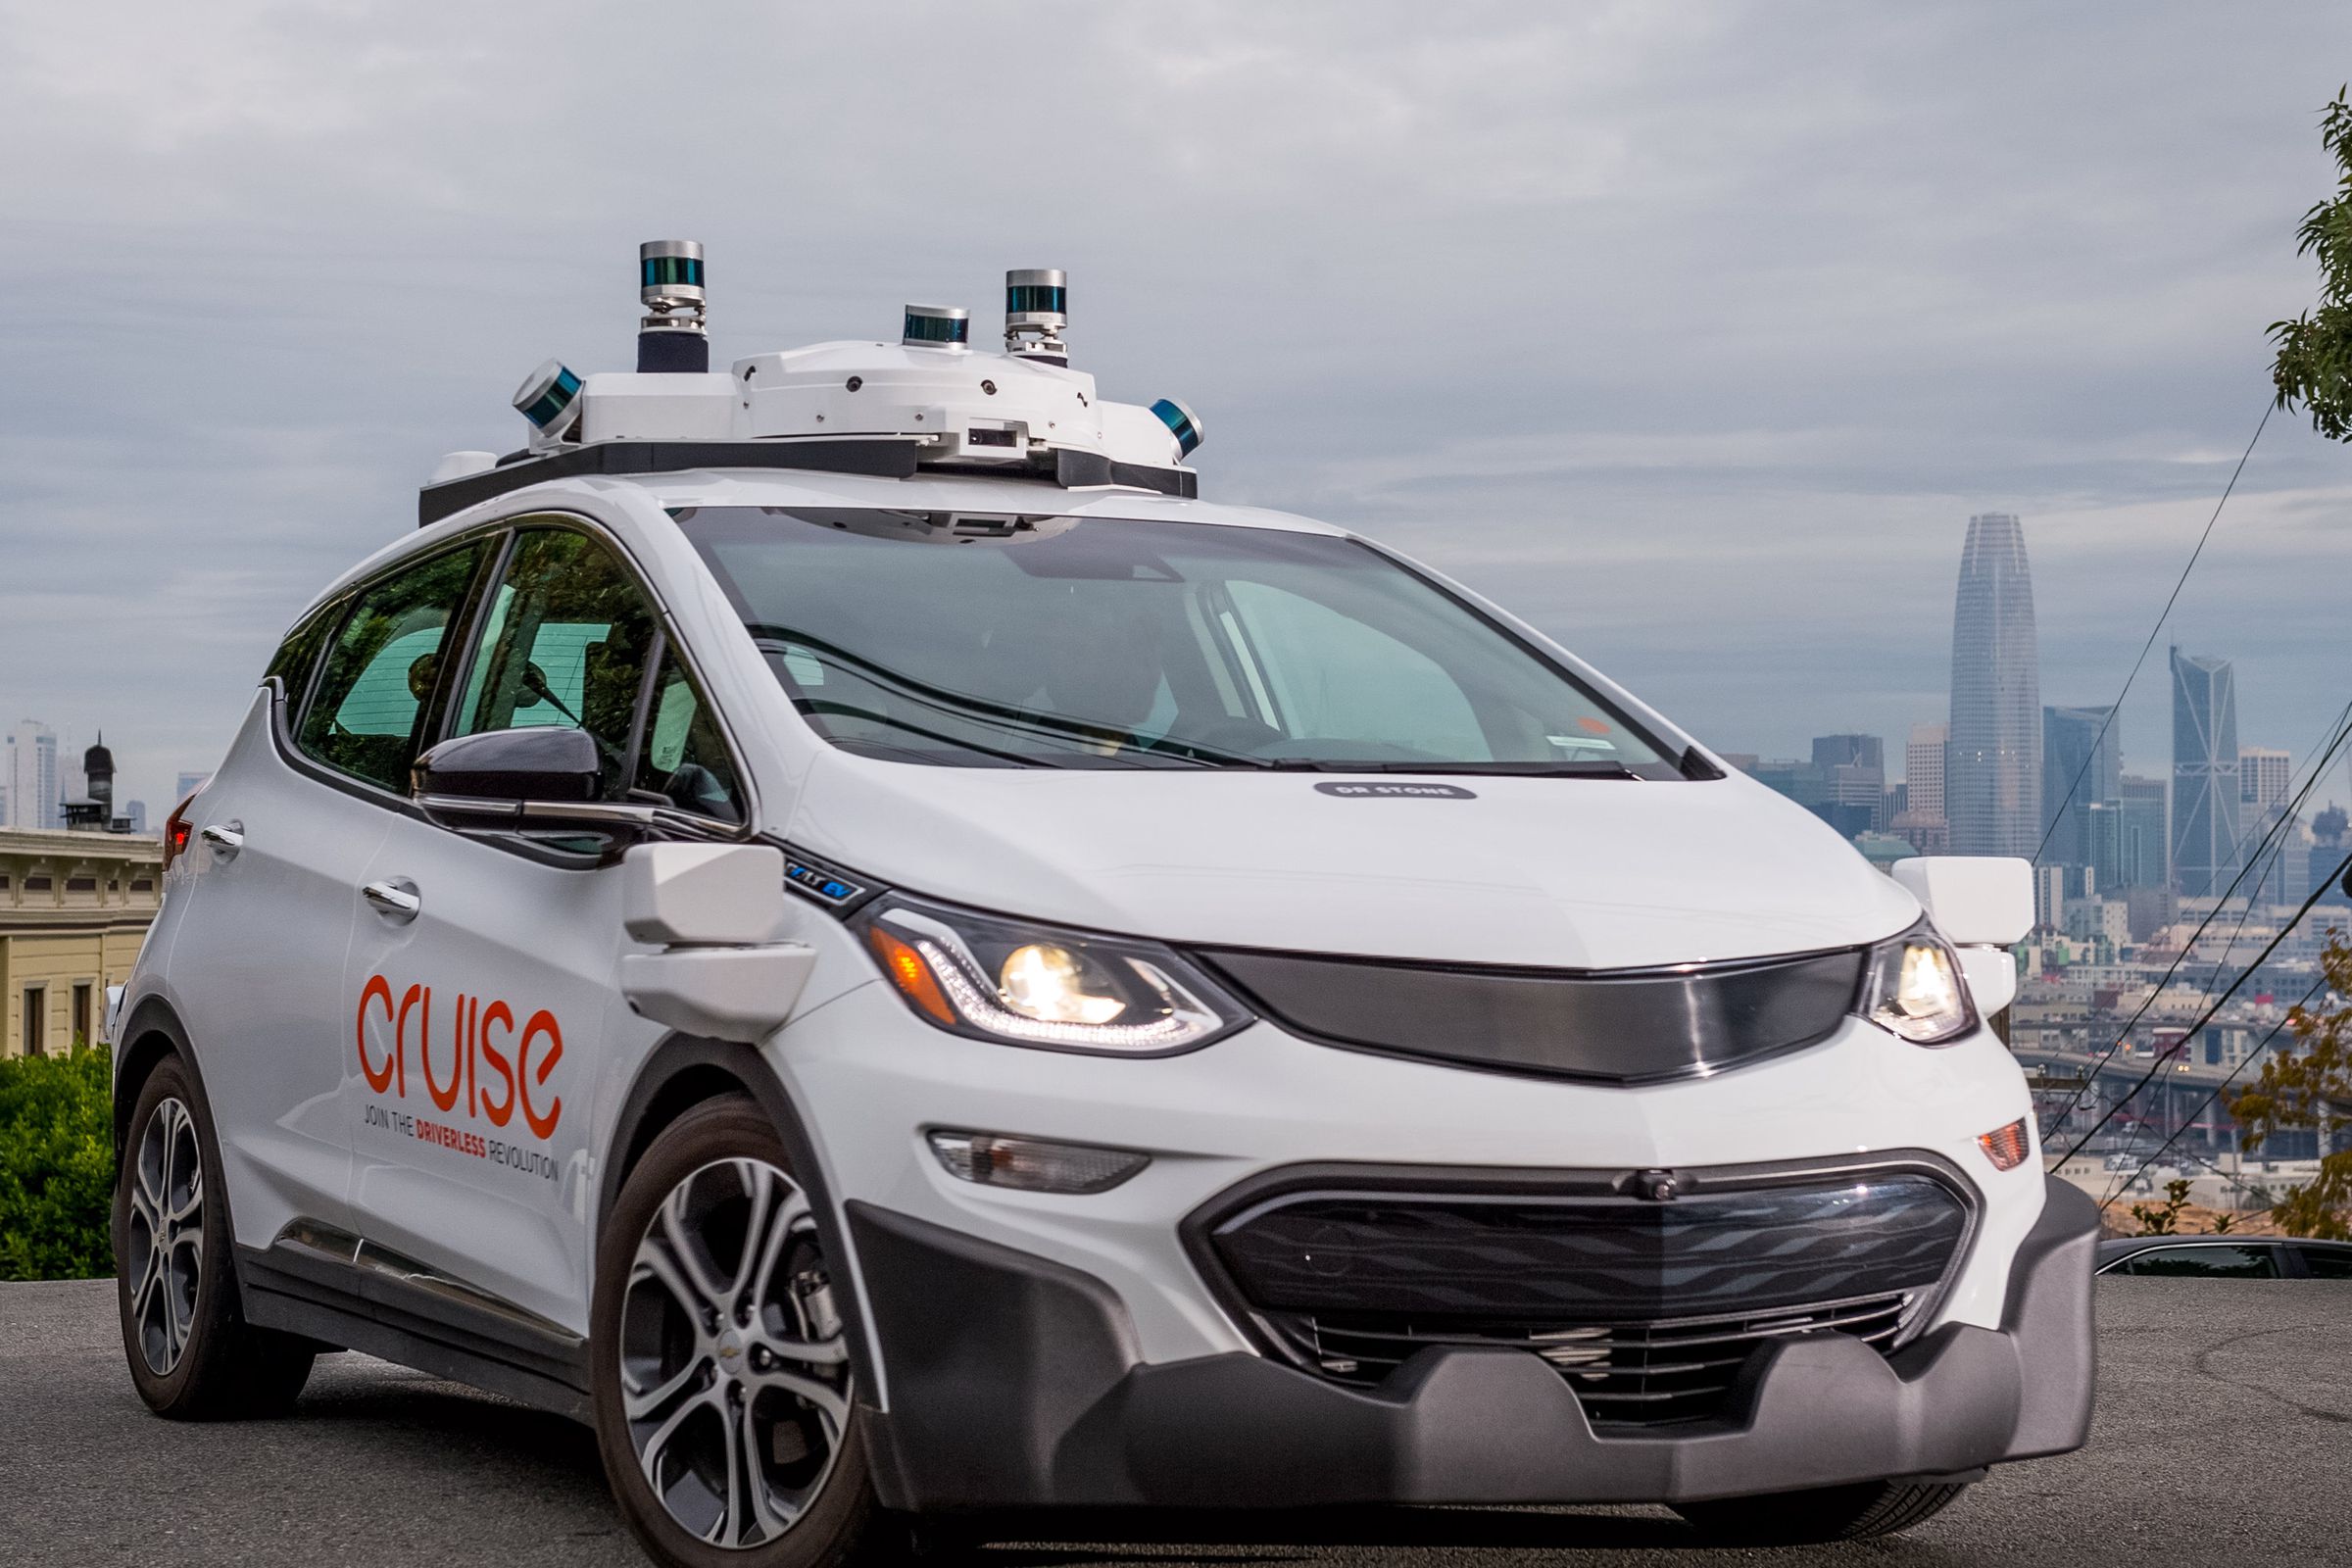 Cruise self-driving test vehicle navigates the urban streets of San Francisco, California. (Photo by Karl Nielsen)